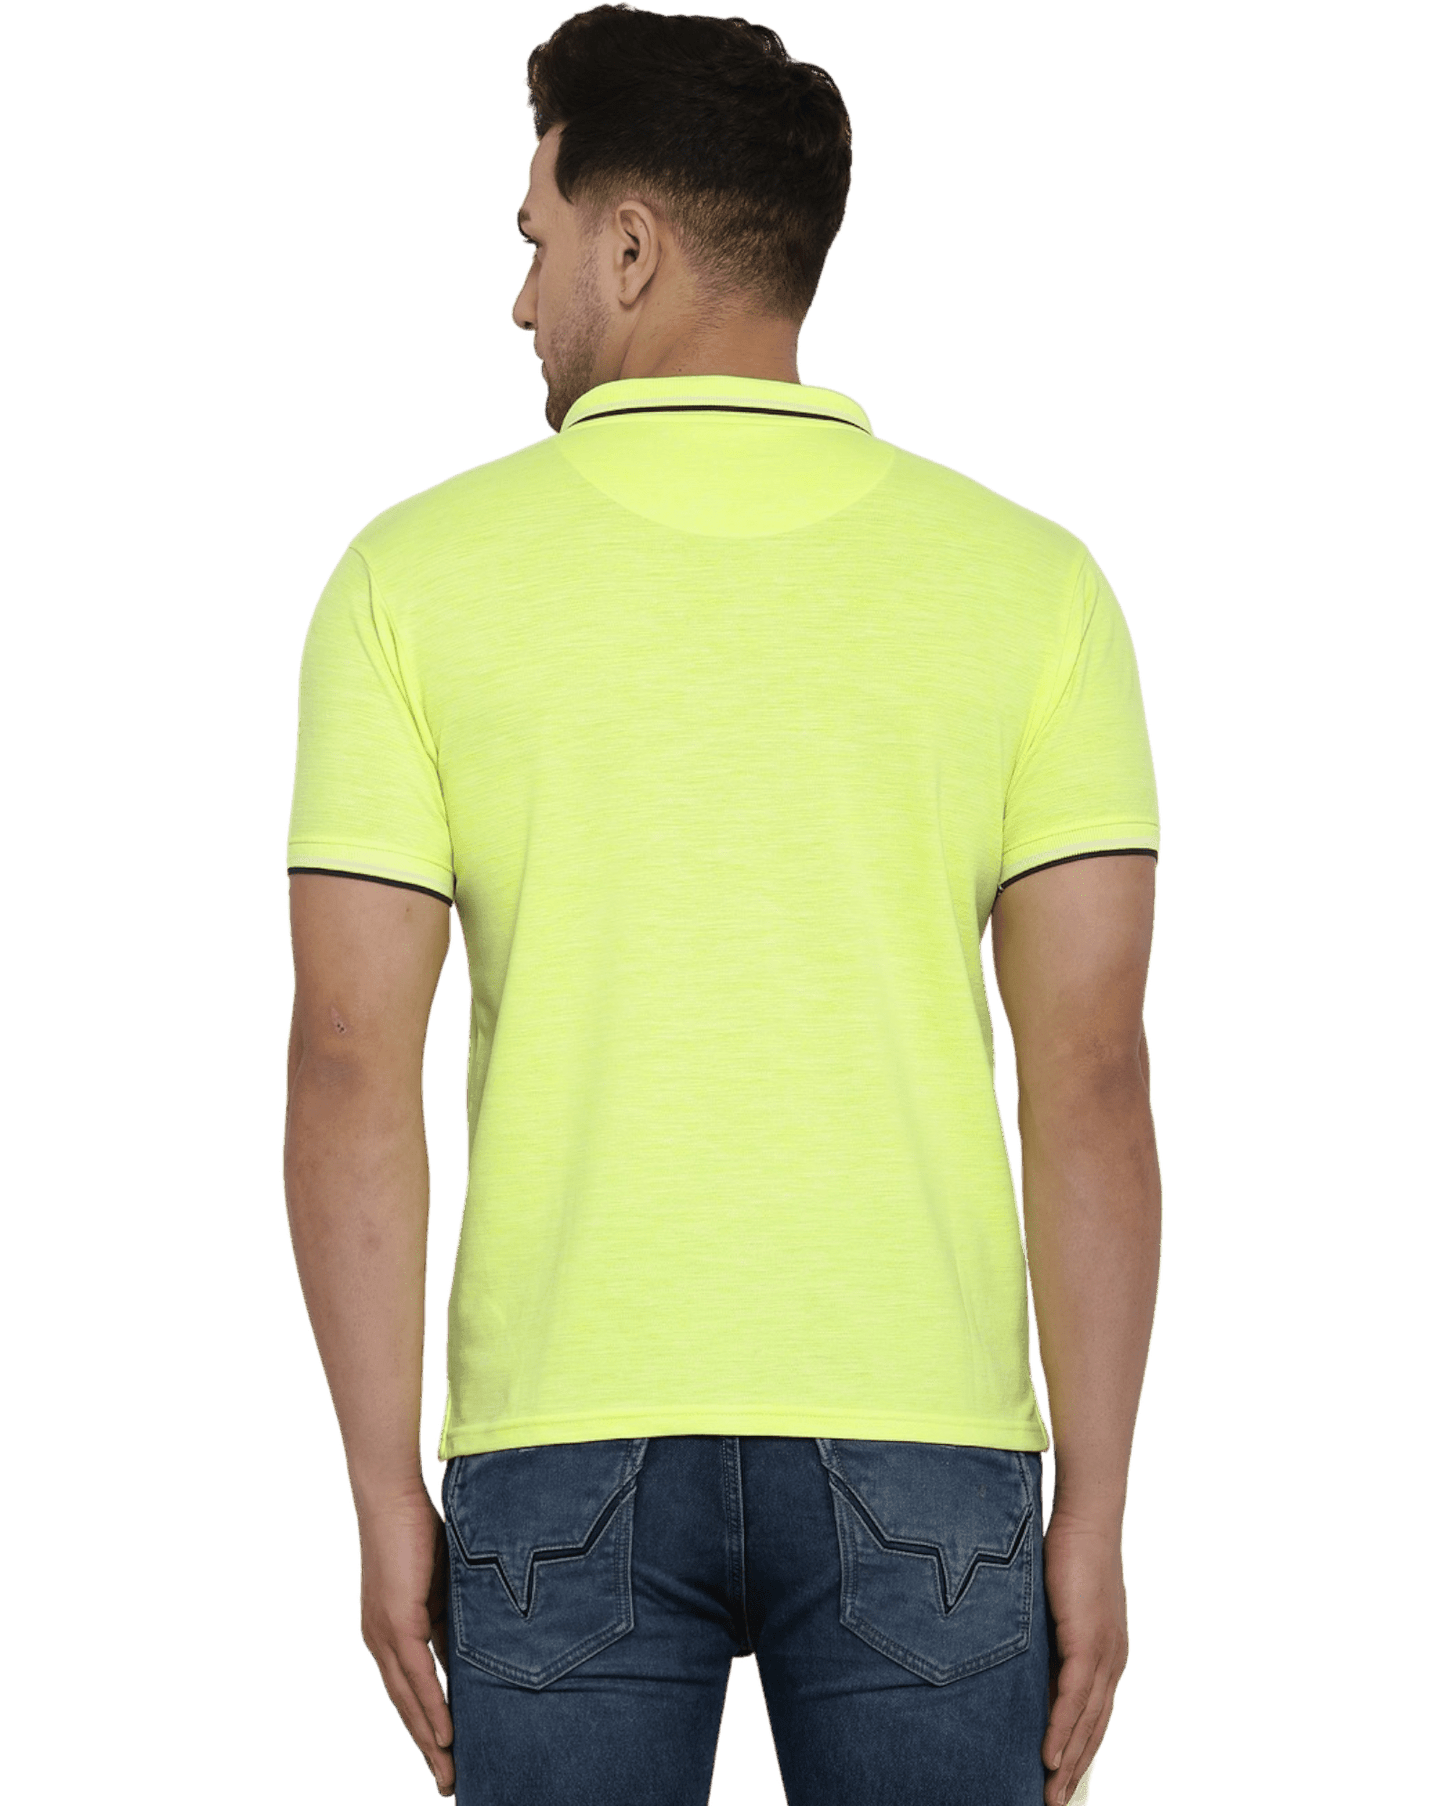 Pepe Jeans Lemon Yellow Short Sleeves Polo T-Shirt - Apparel For Less